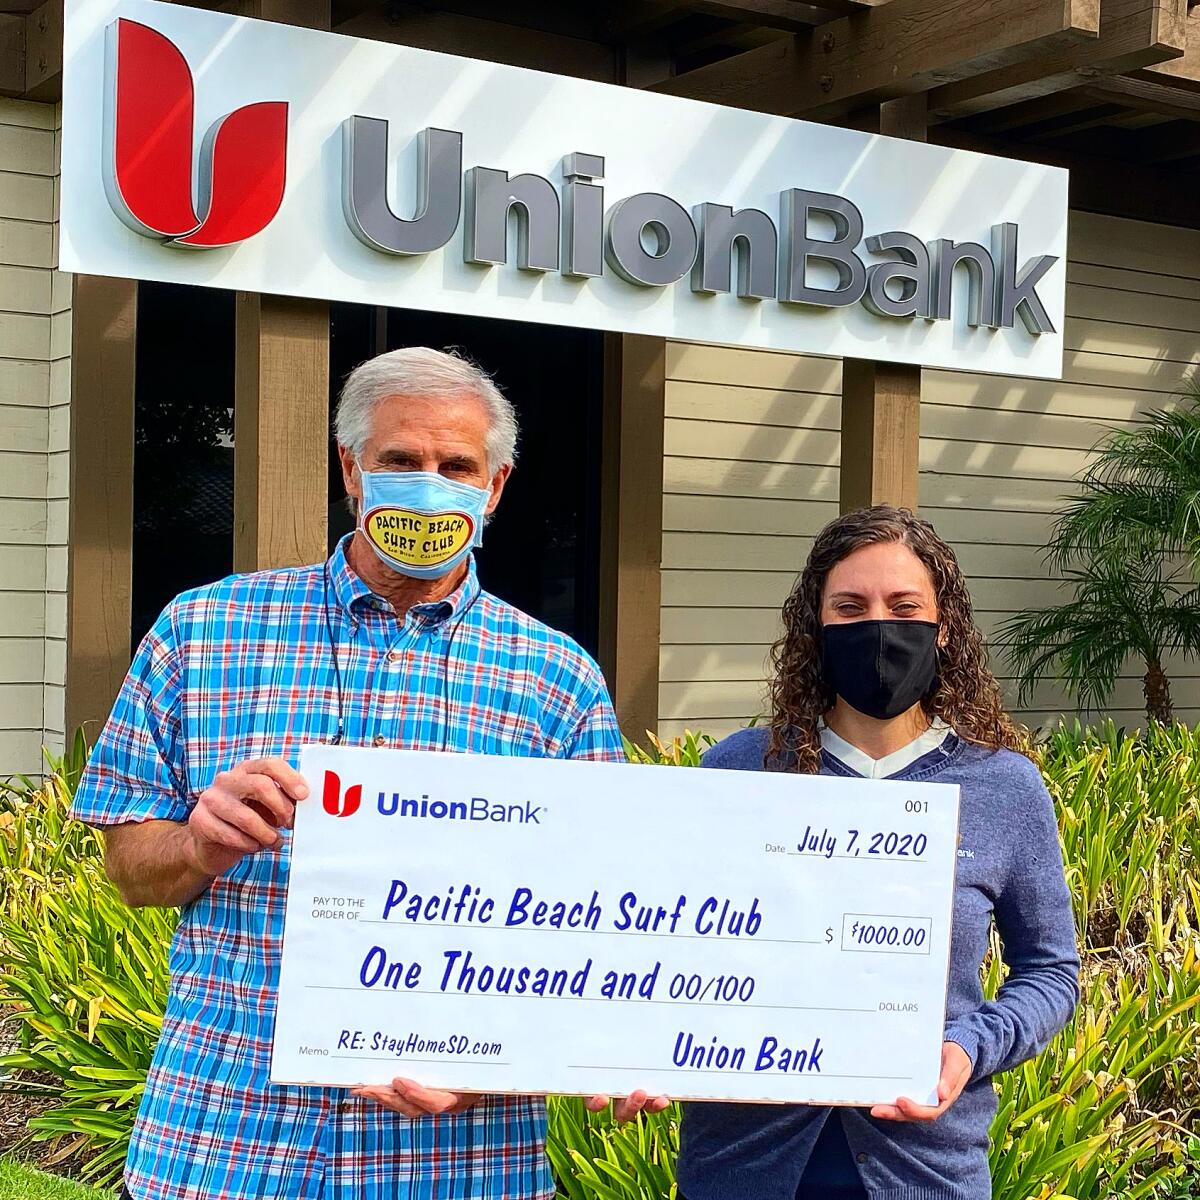 PB Surf Club President Ron Greene accepting a $1,000 donation from Cathy Principato of Union Bank